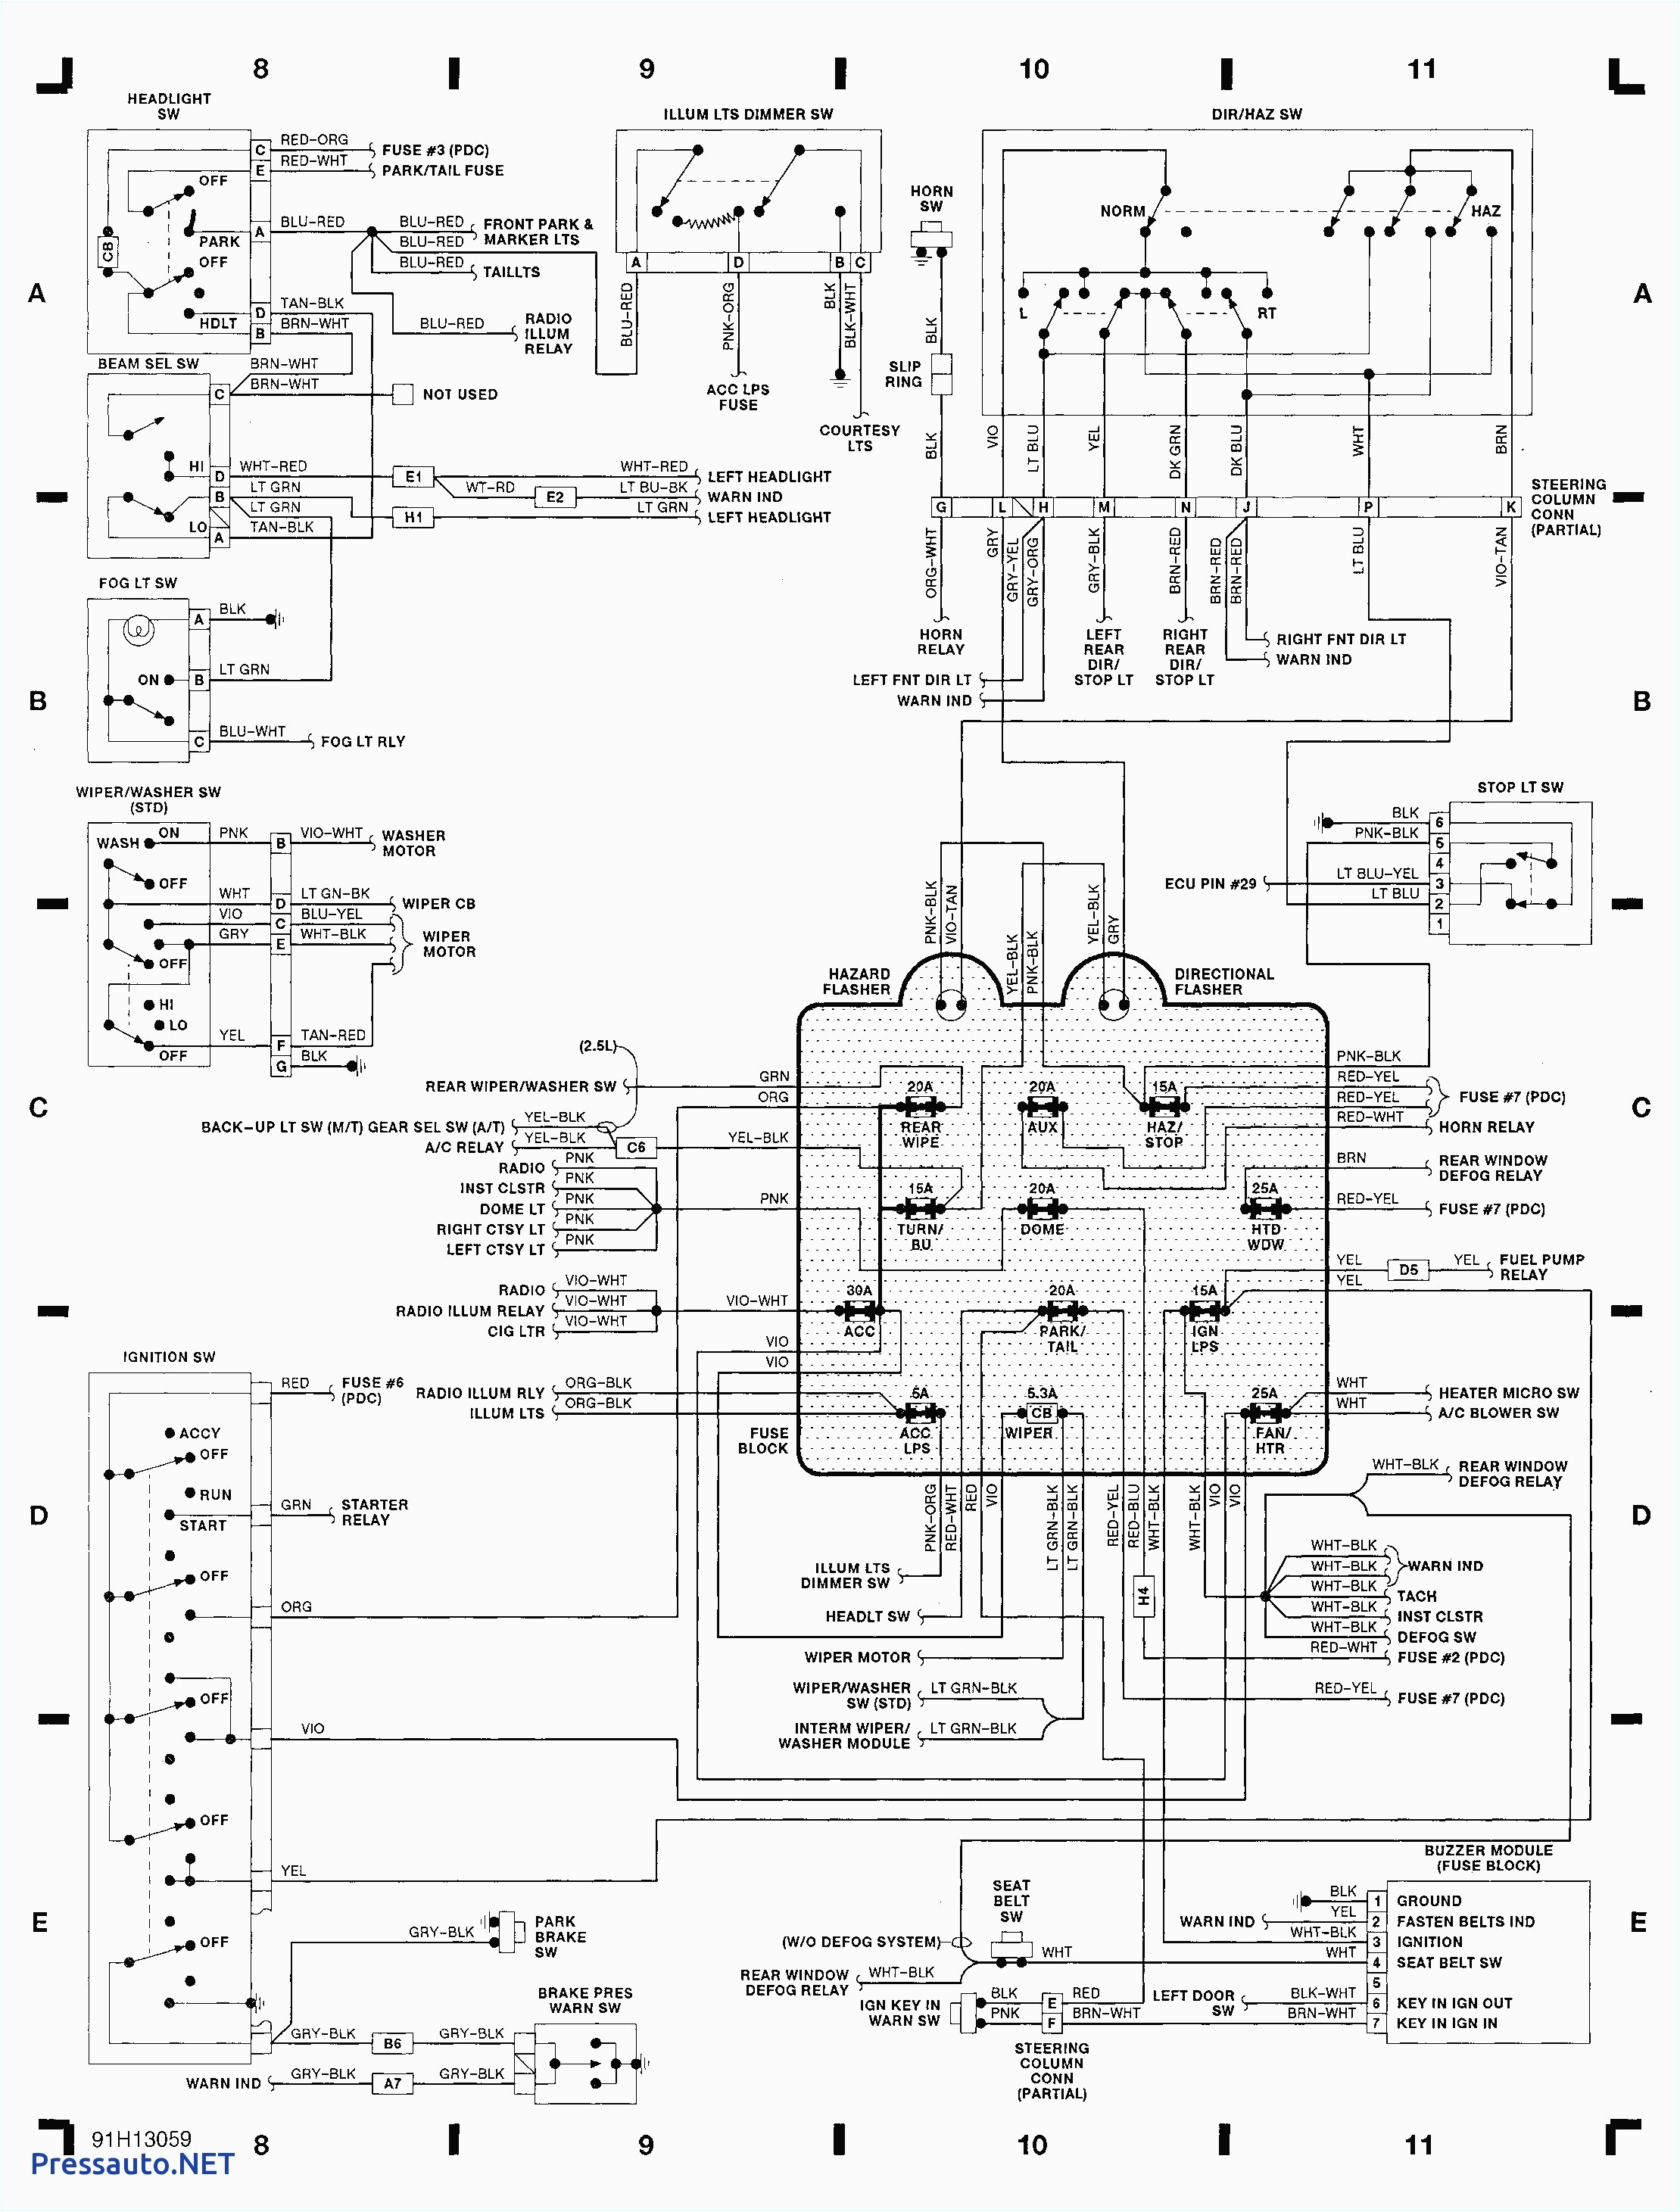 jeep wrangler wiring schematic a jeep rangler